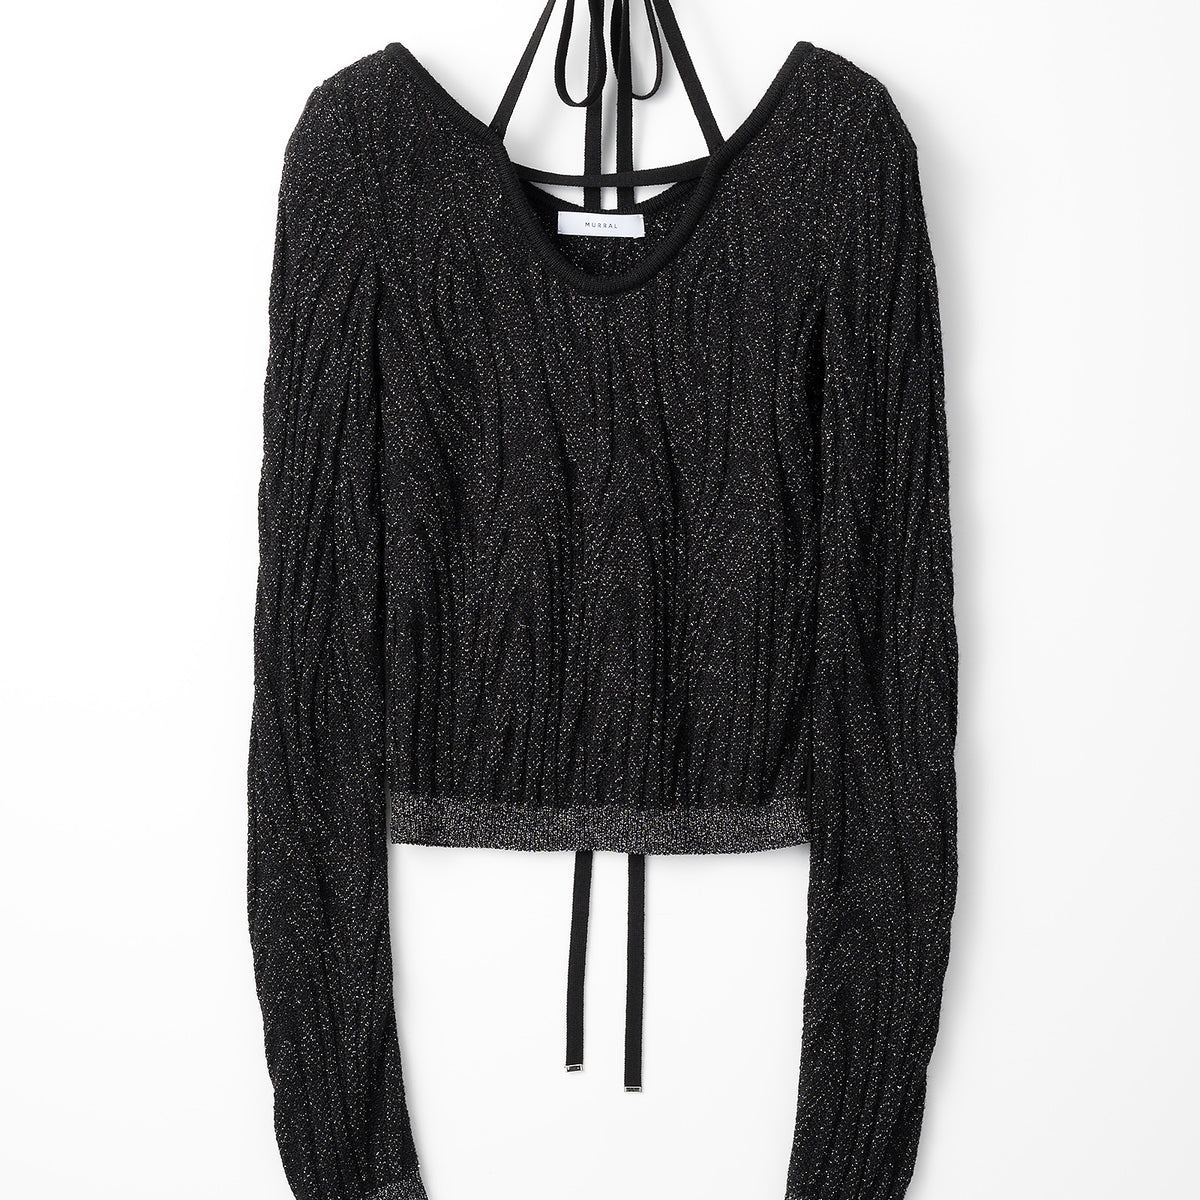 Frost knit top (Black)